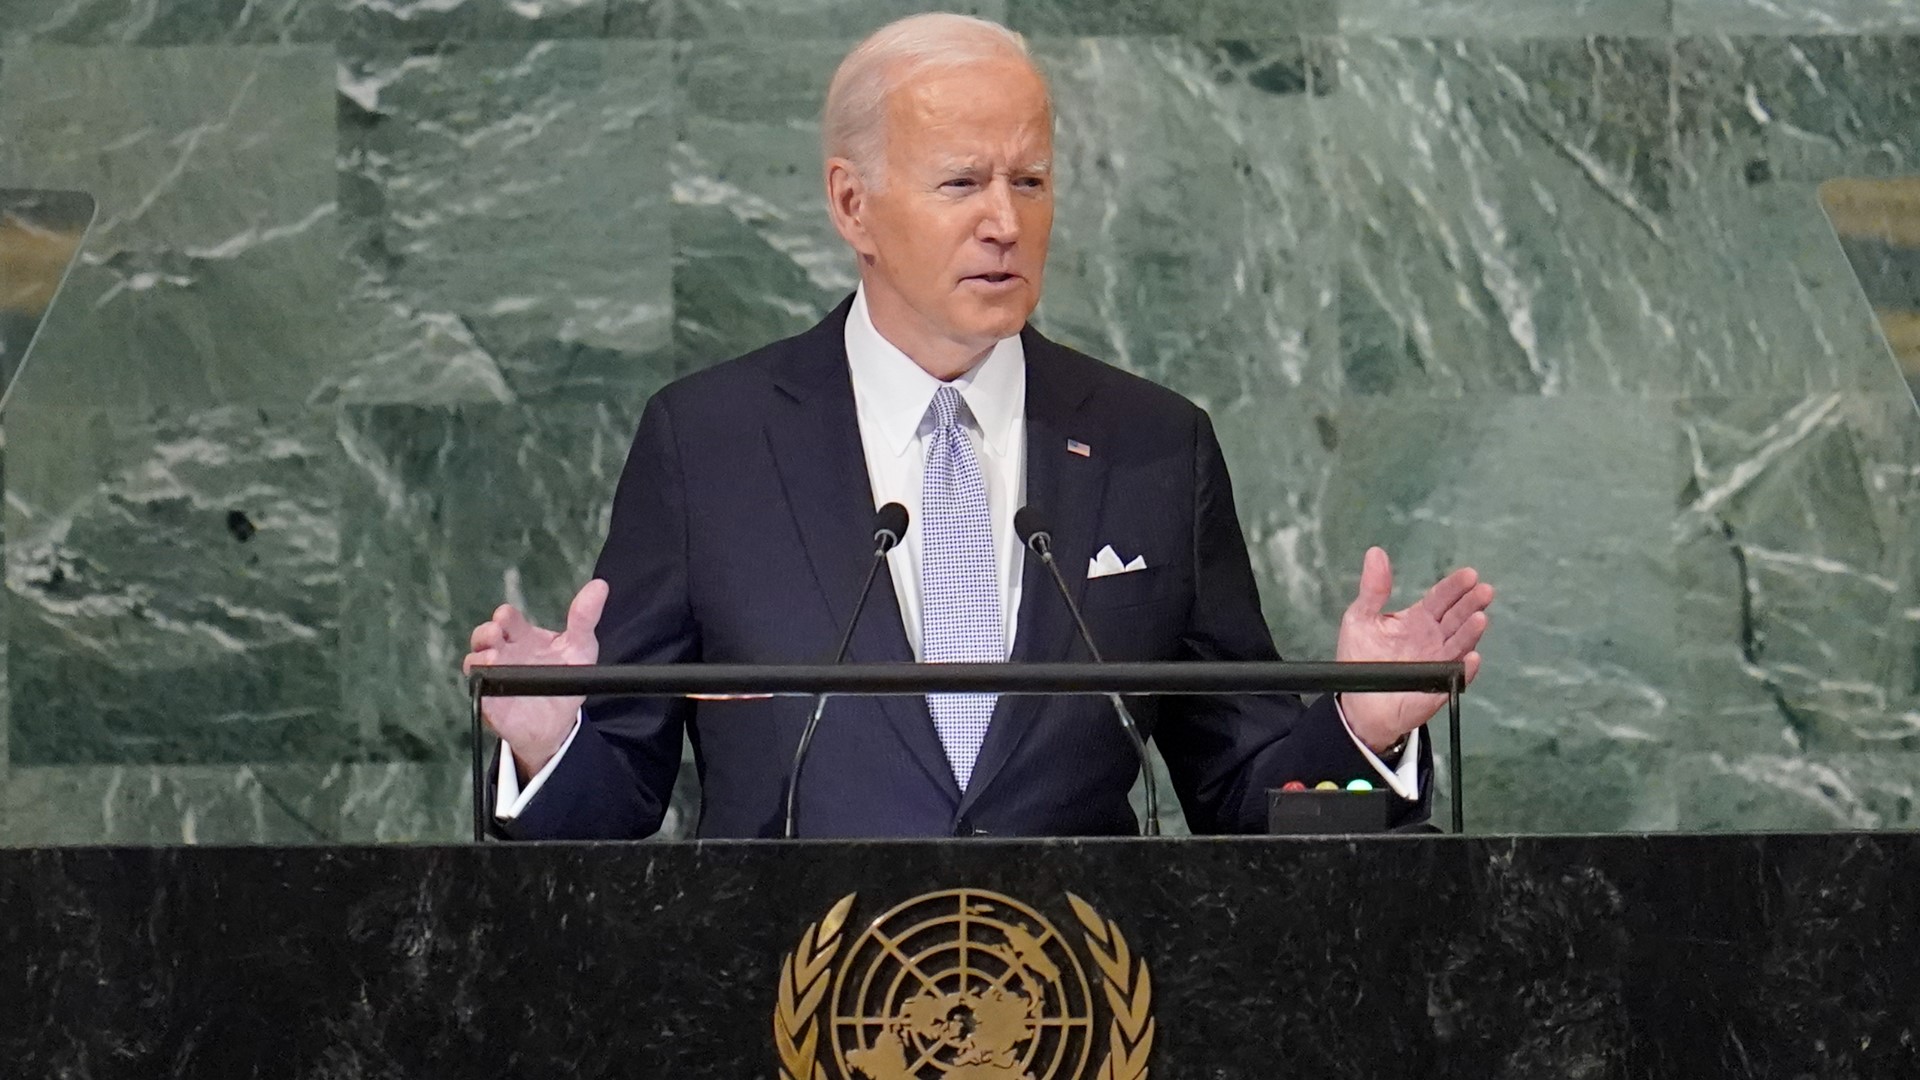 In his address to the United Nations General Assembly, President Biden called on the world to stand up to Russia for its invasion of Ukraine.